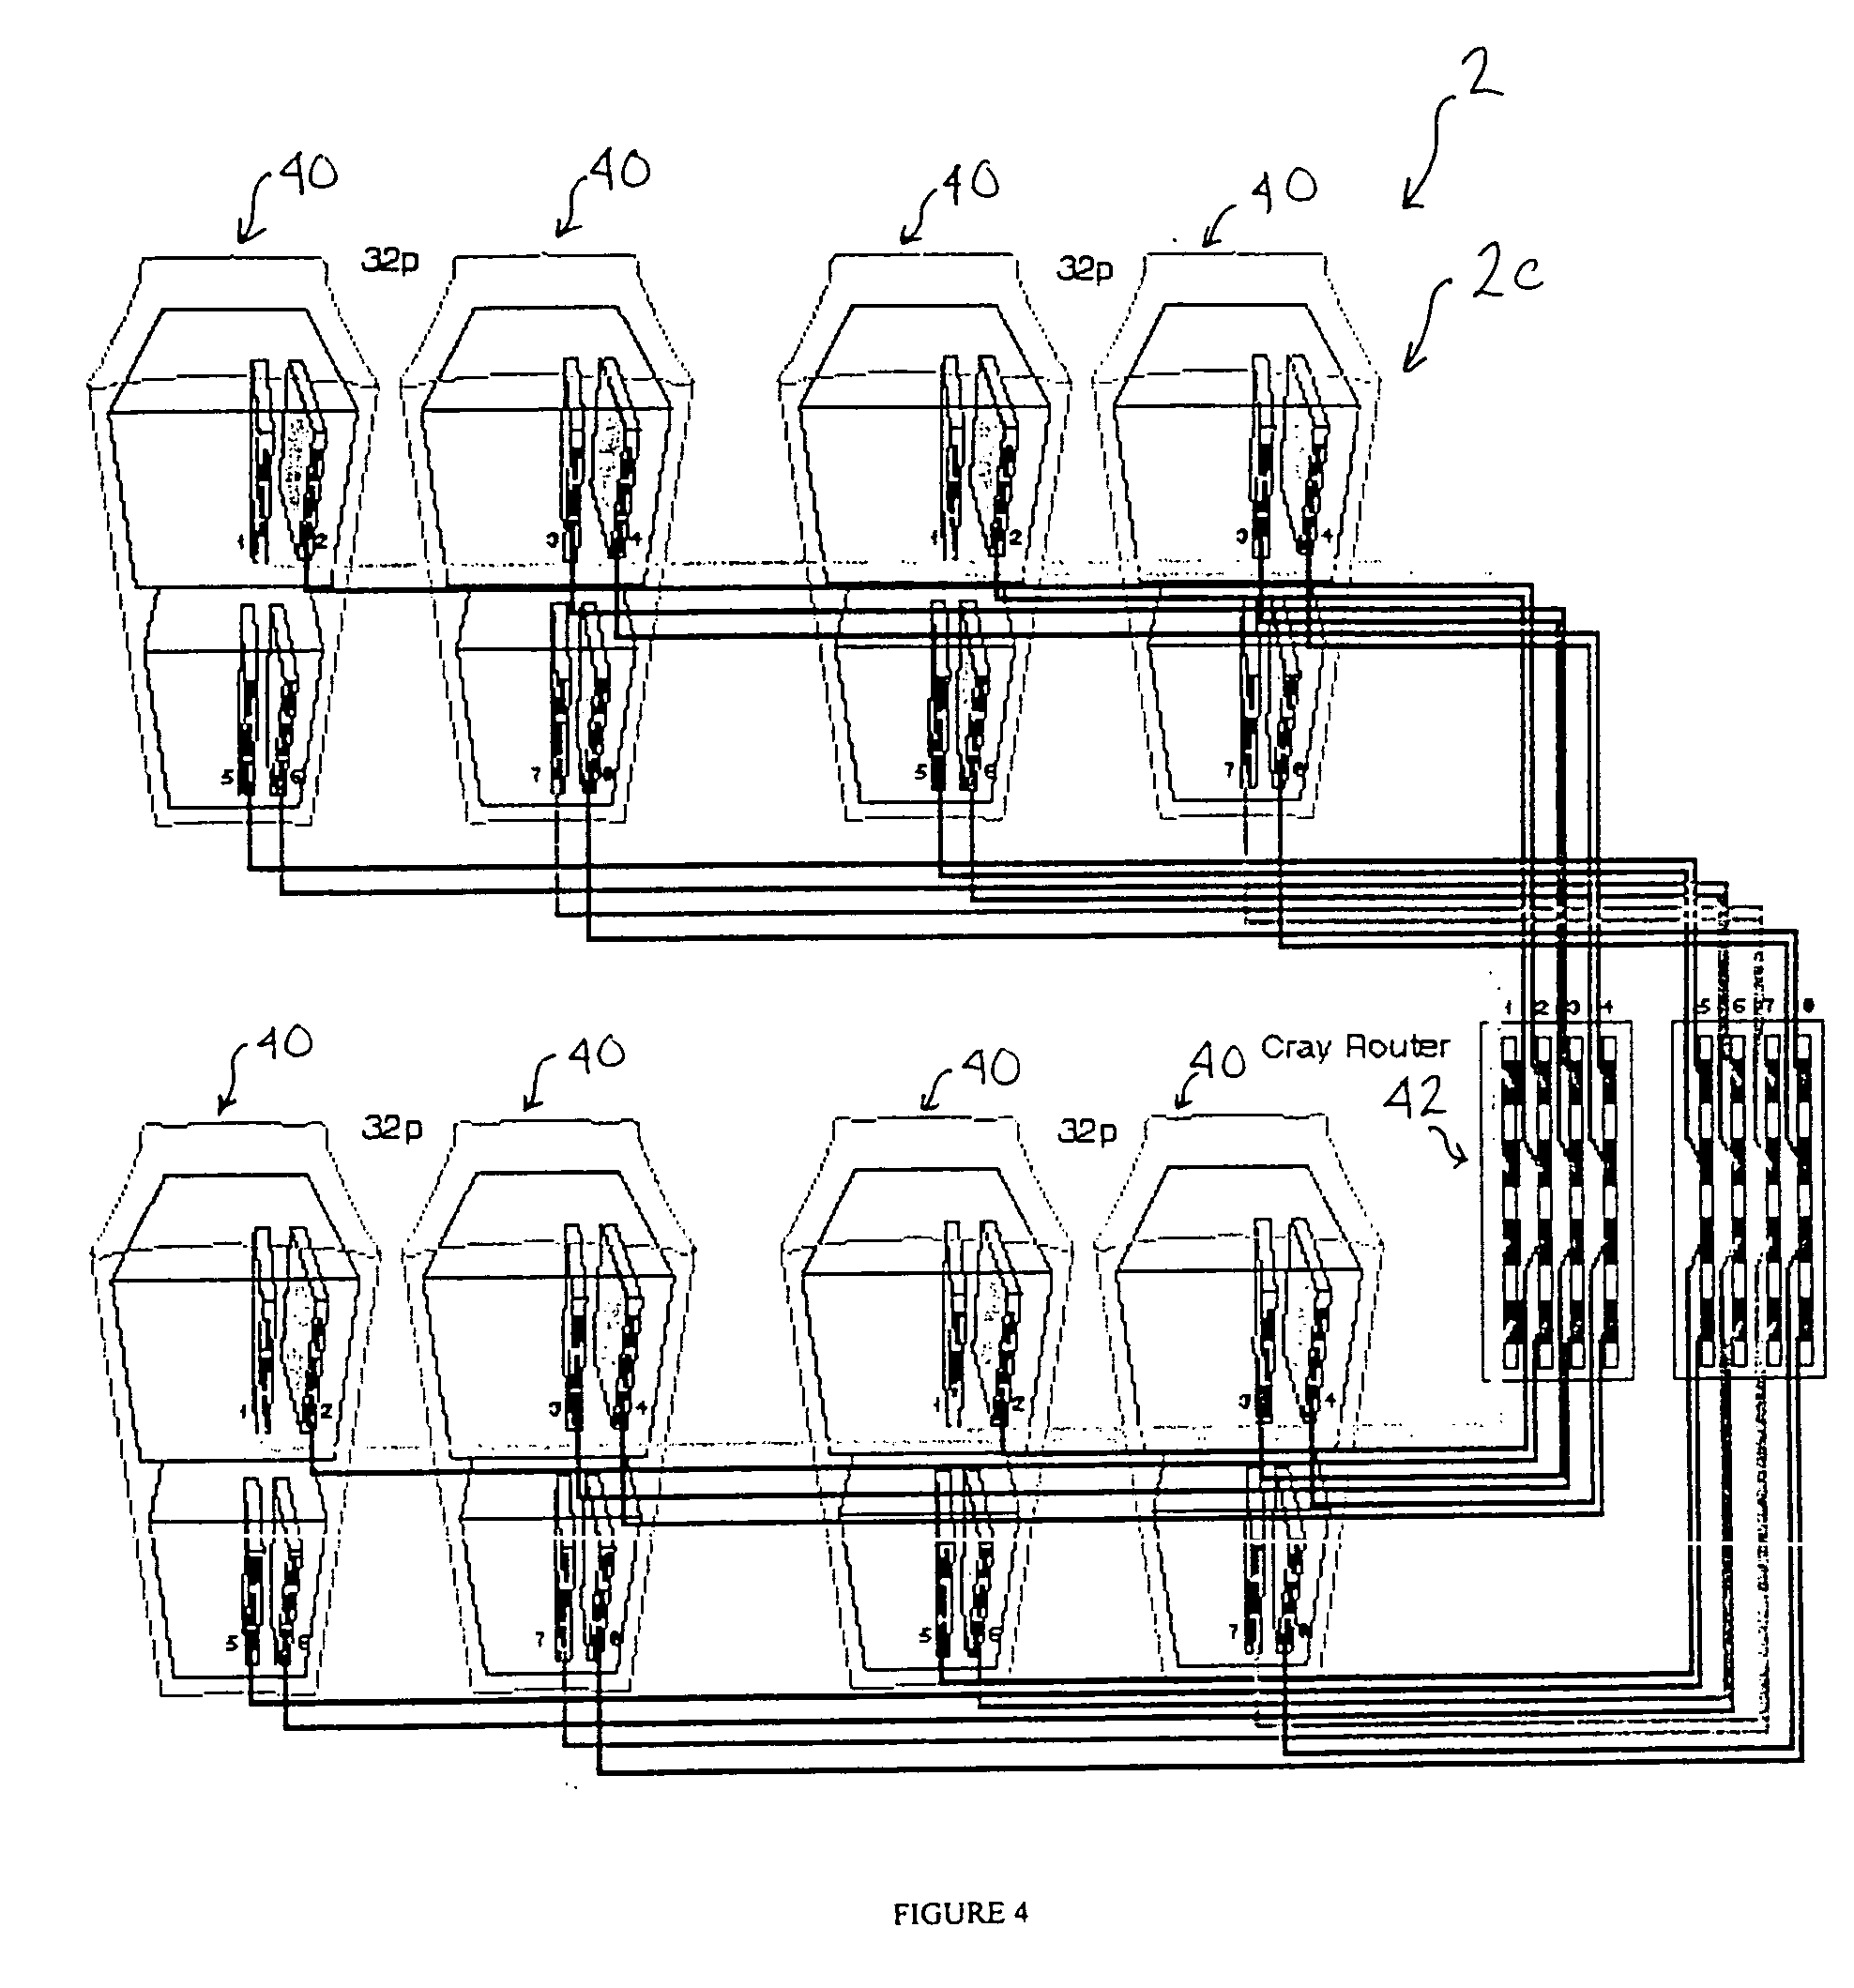 Topology aware scheduling for a multiprocessor system